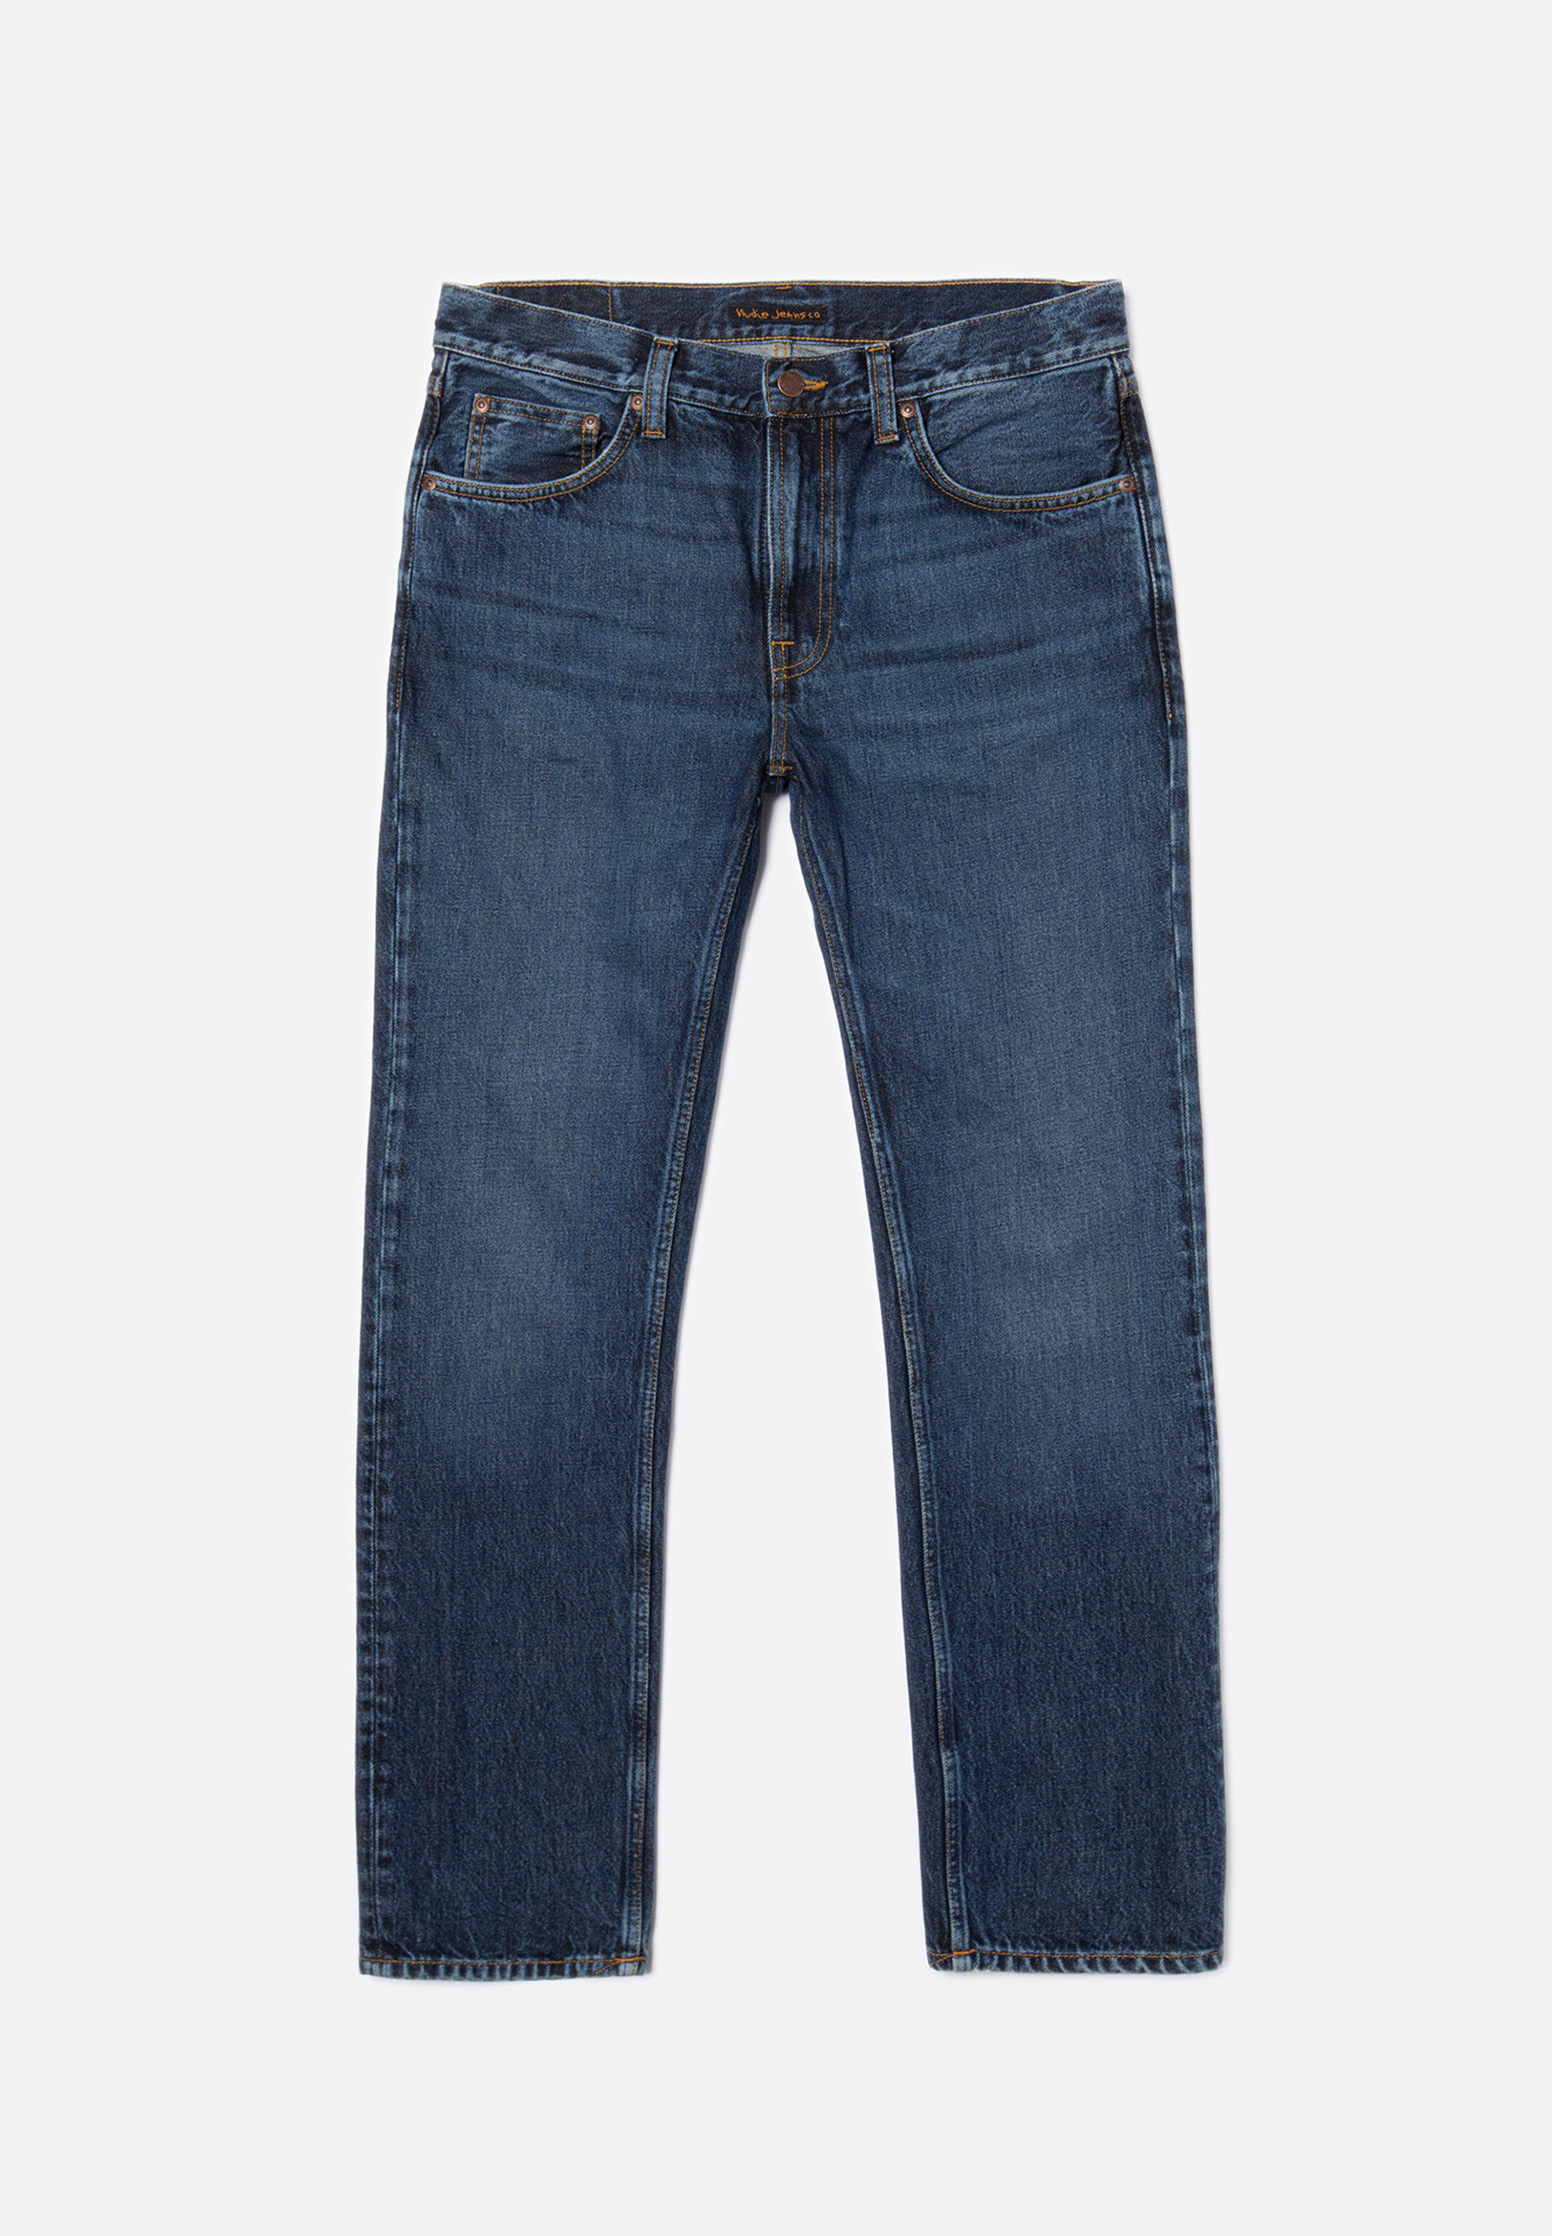 NUDIE JEANS Jeans Gritty Jackson blue soil 31/32